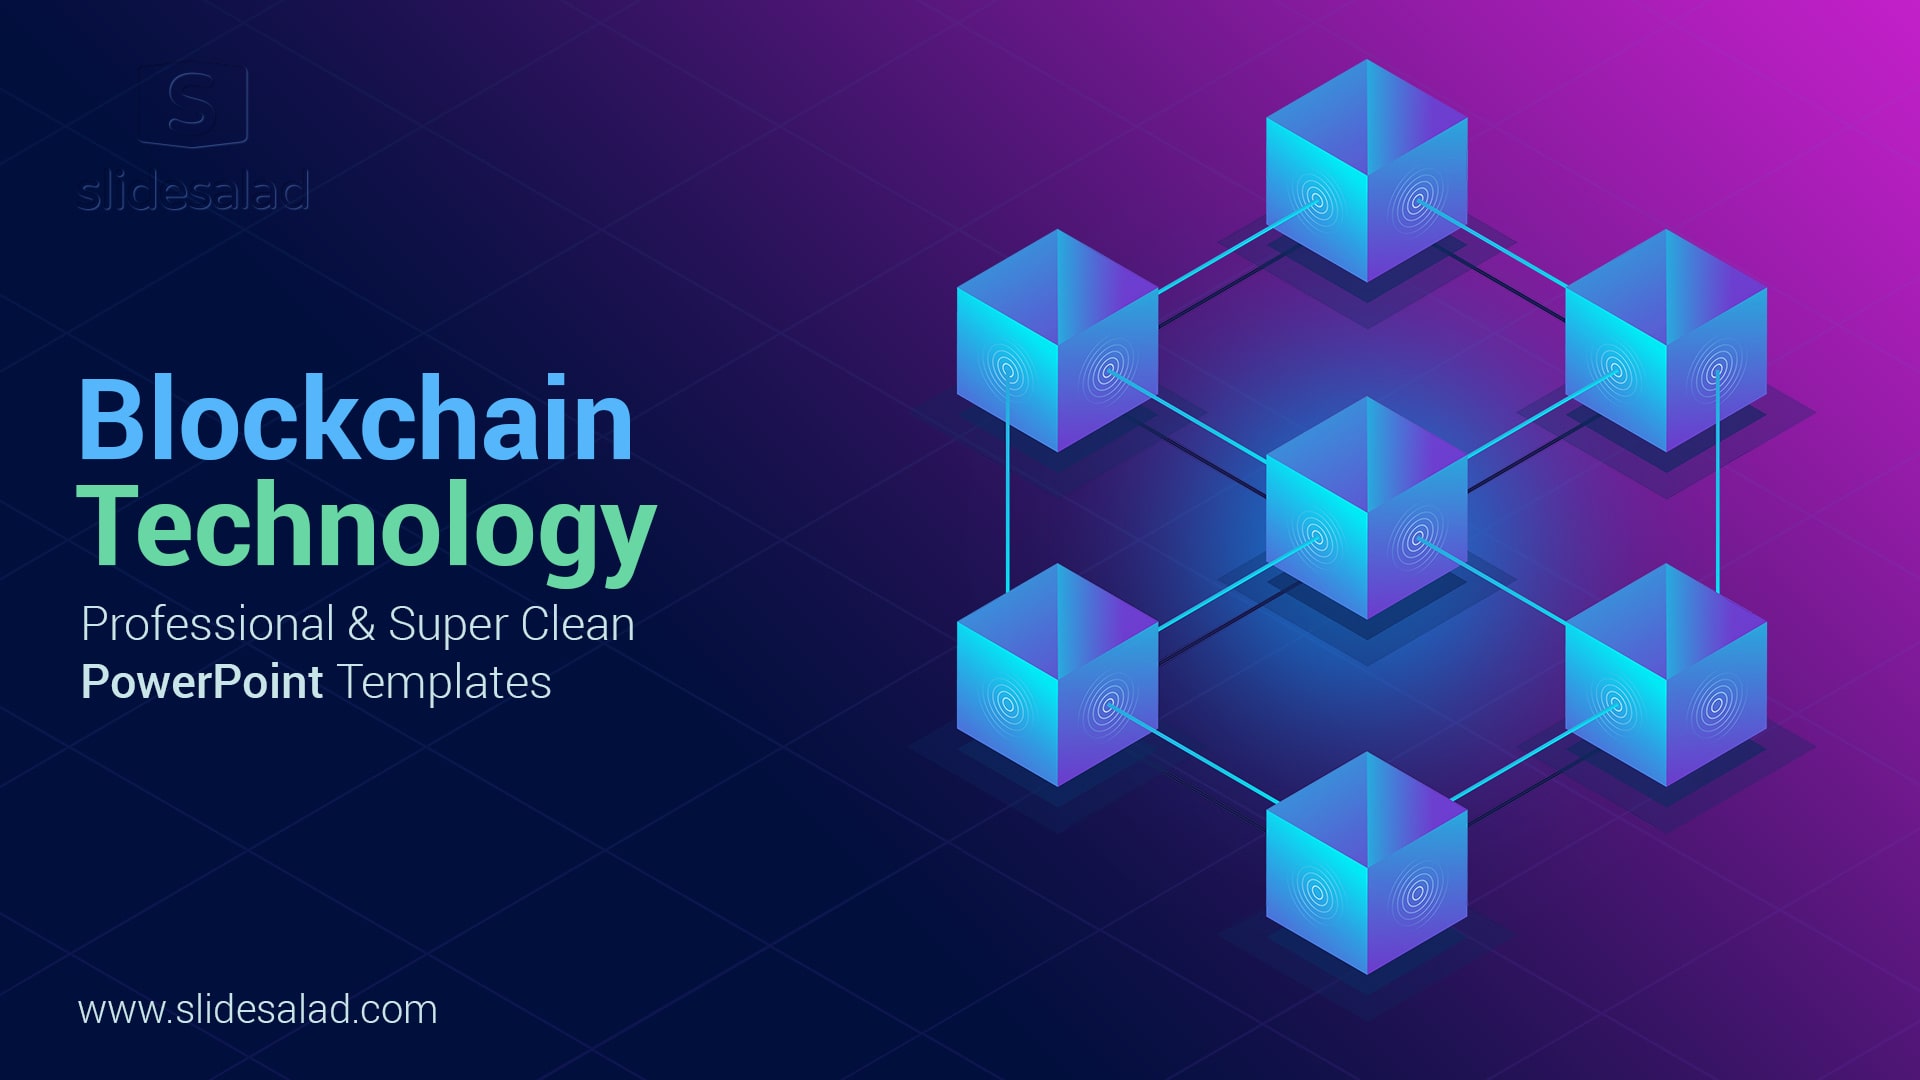 Blockchain PowerPoint Template Slides and Infographics Designs - Make Stunning Presentations on Cryptocurrency Financial Services